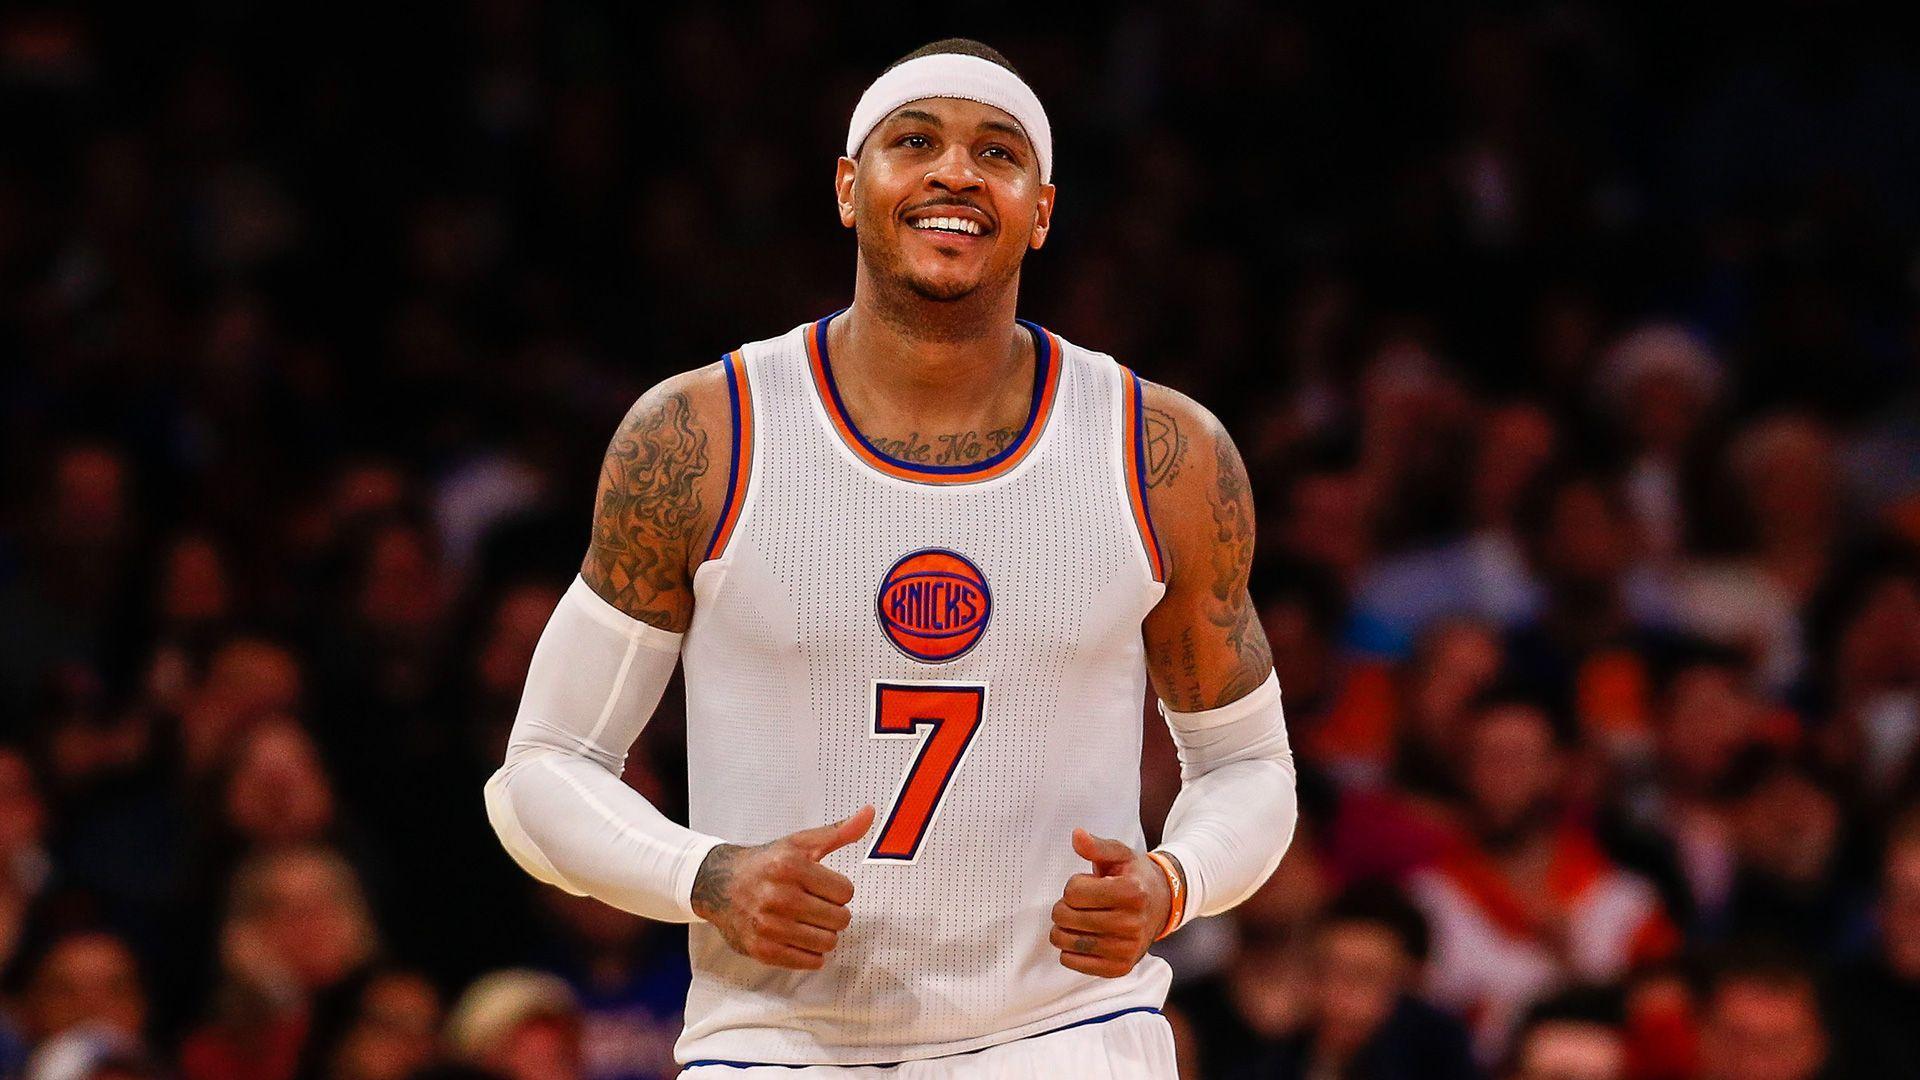 Carmelo Anthony believes Knicks will compete for NBA title this